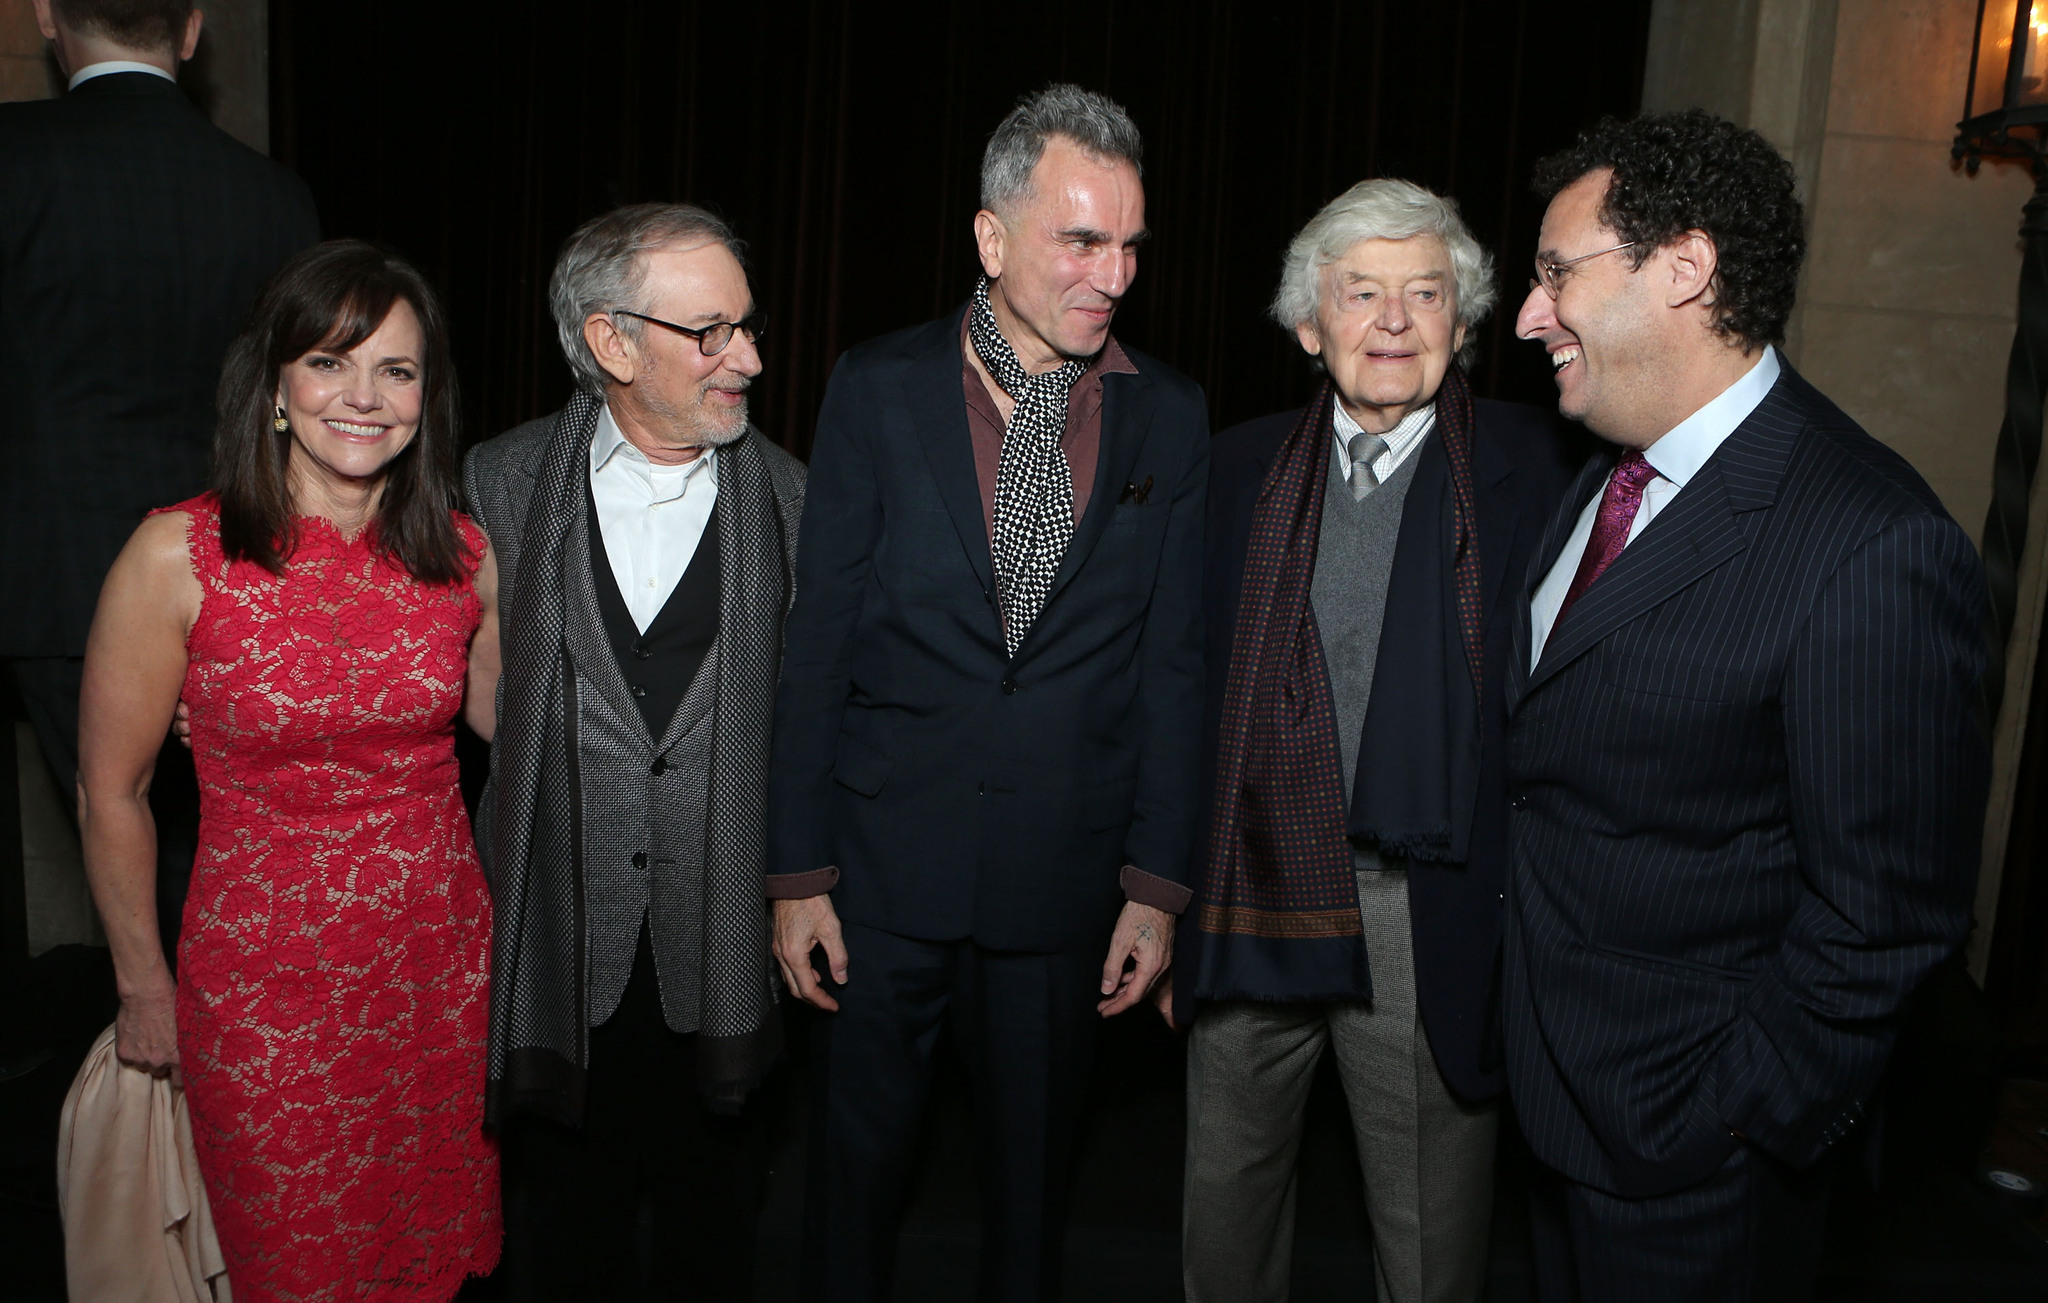 Steven Spielberg, Daniel Day-Lewis, Sally Field, Hal Holbrook and Tony Kushner at event of Linkolnas (2012)